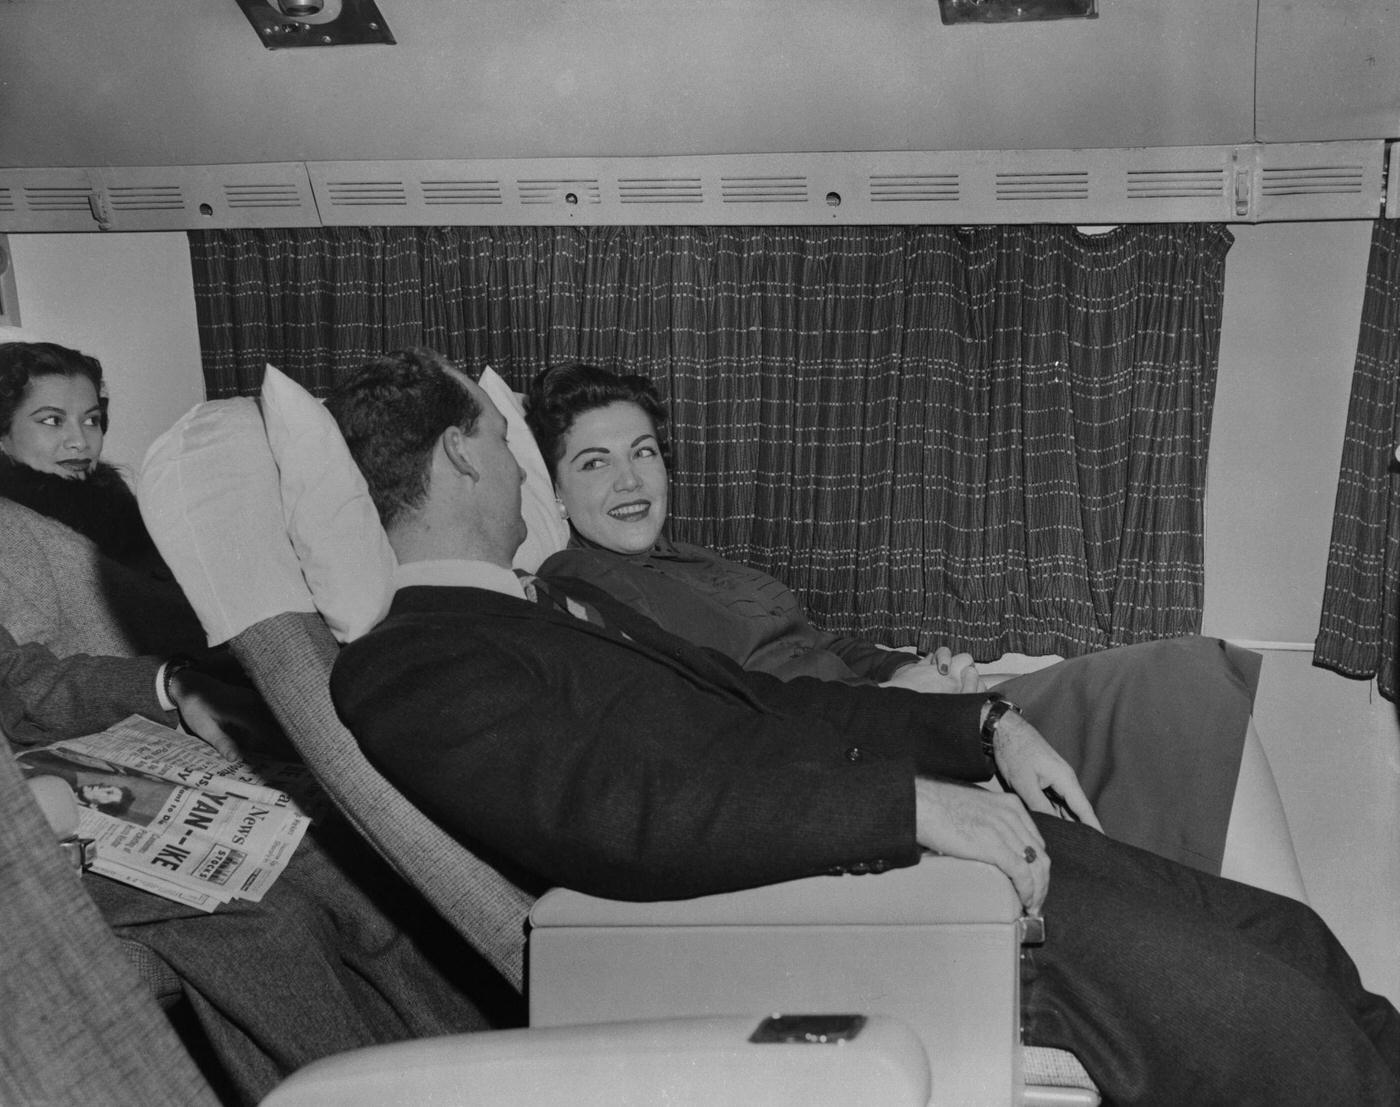 Passengers get ready to nap on a Transocean Air Lines Boeing 377 Stratocruiser in the mid1950s. Transocean Air Lines was a pioneer discount airline that operated between 1946 and 1962.